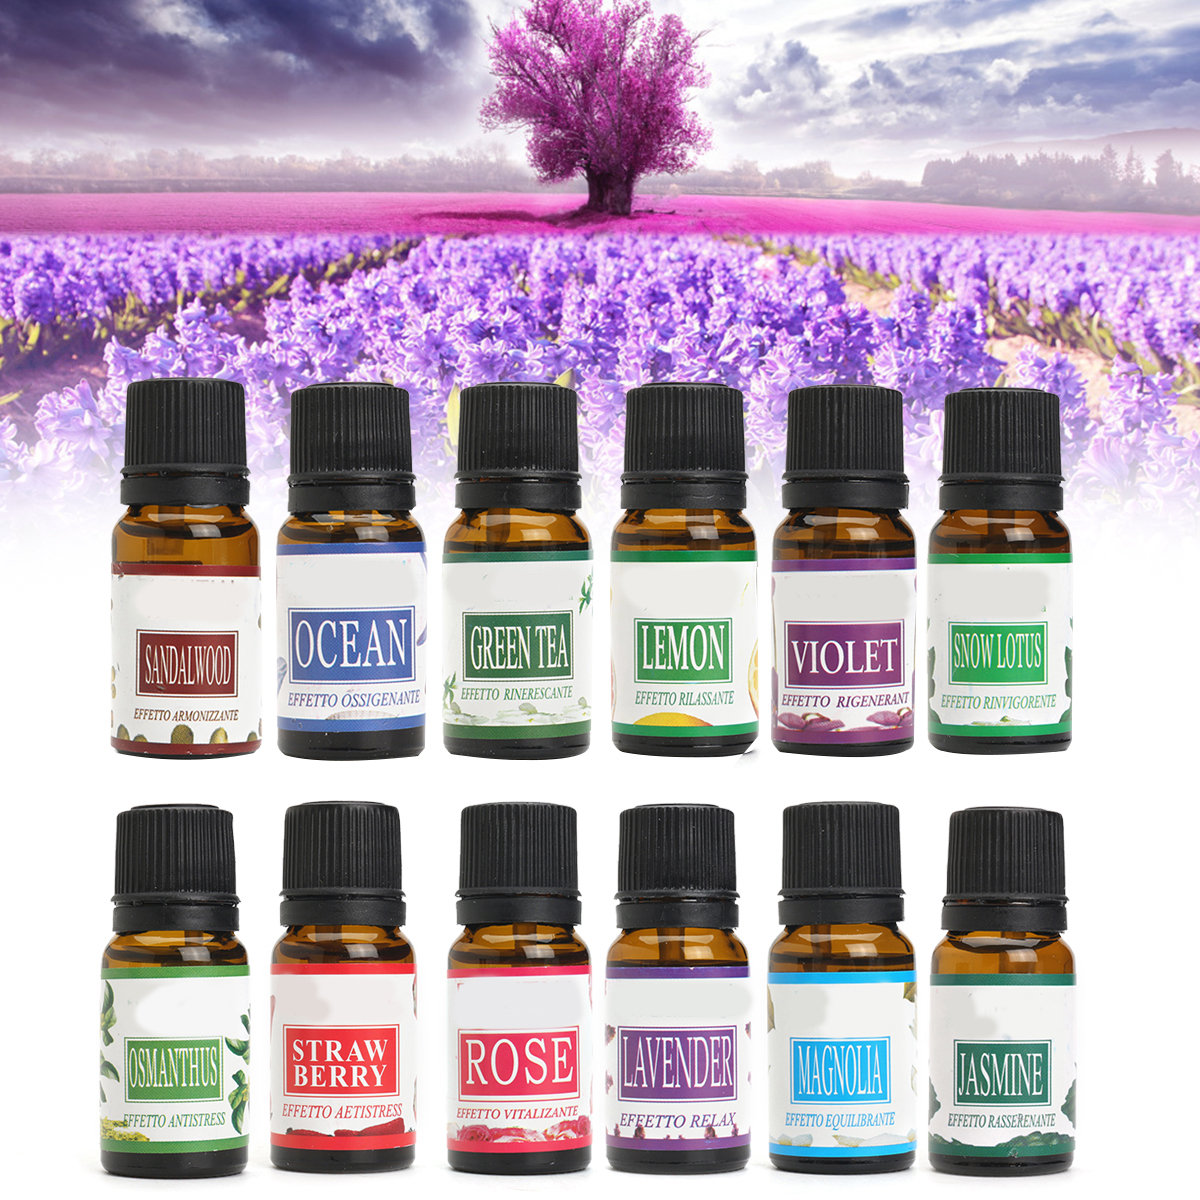 12pcs Aromatherapy Essential oil for Air Diffuser Aroma Therapy Humidifier